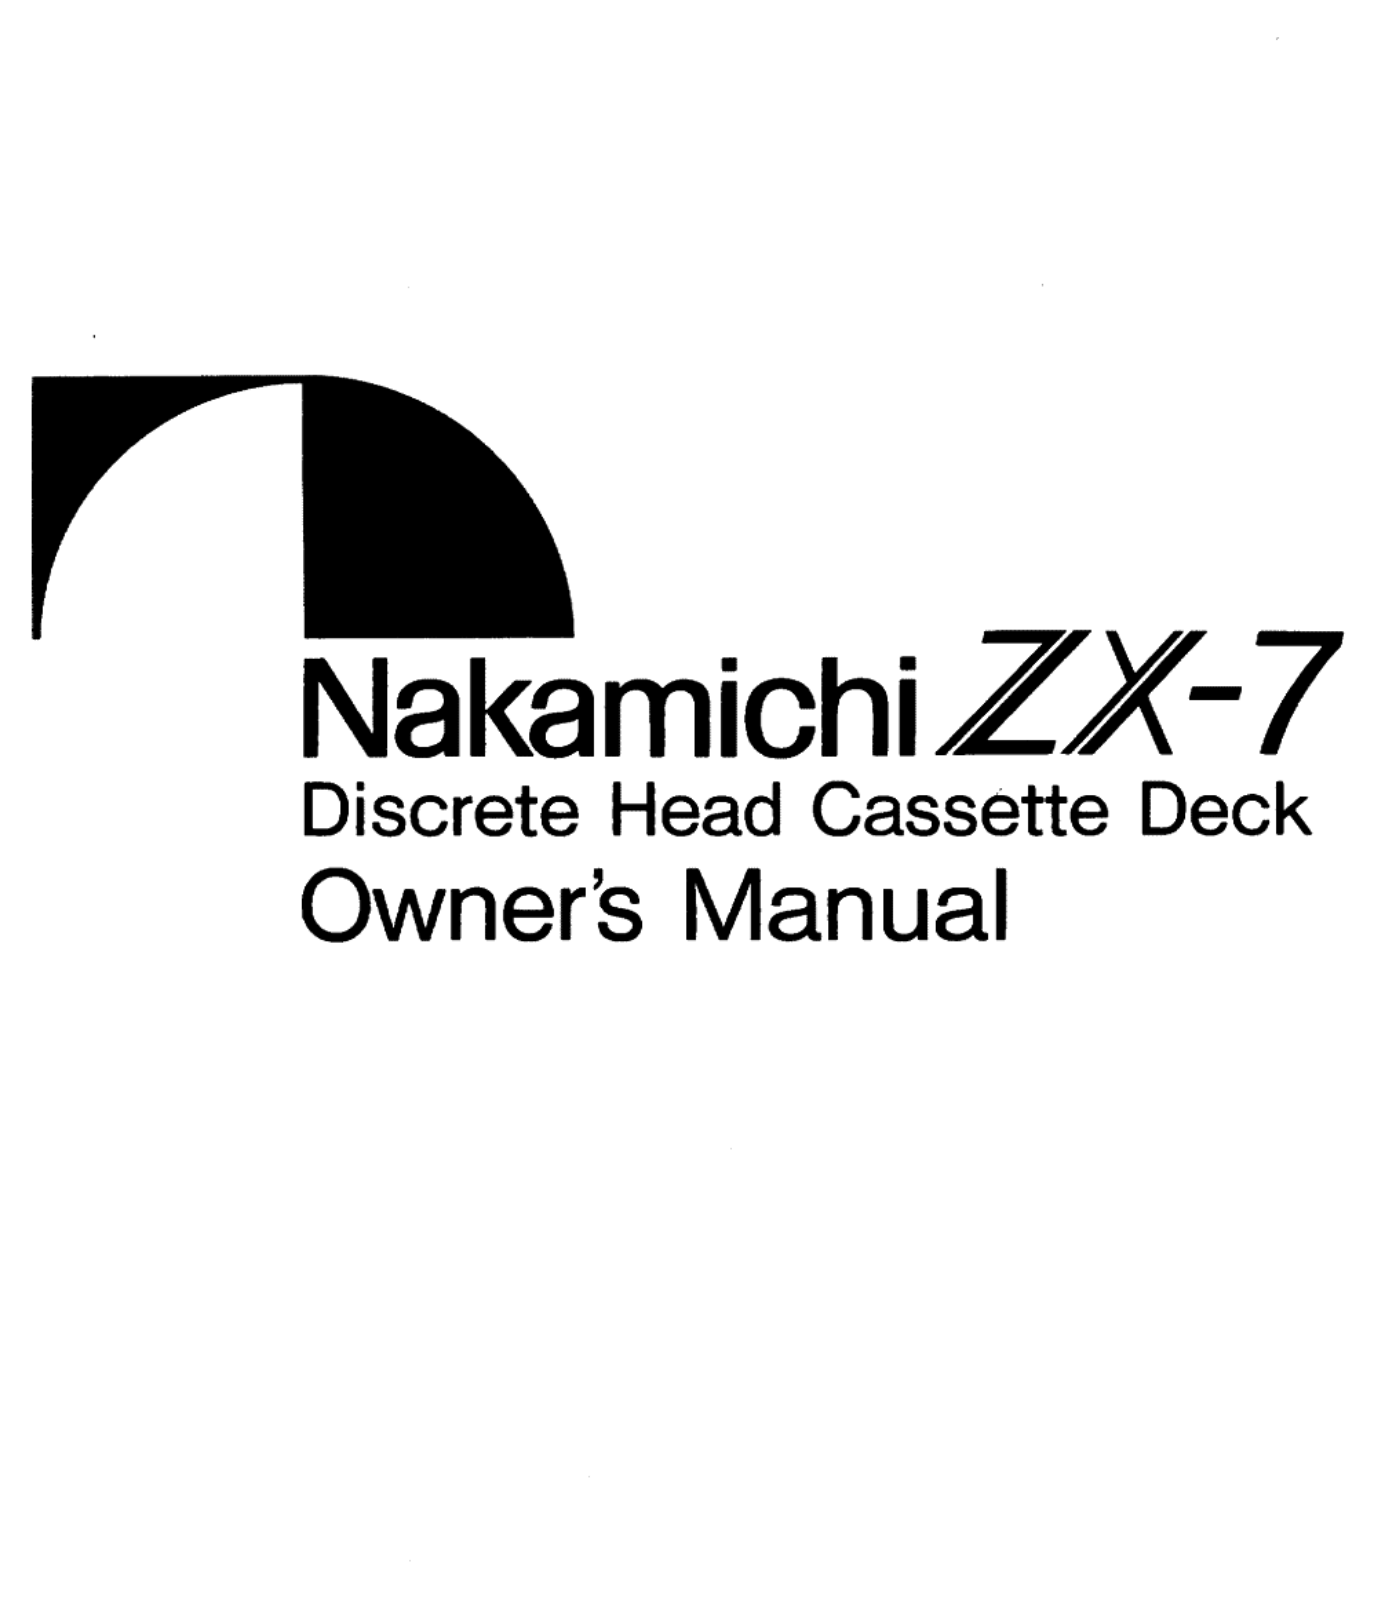 Nakamichi ZX-7 Owners manual